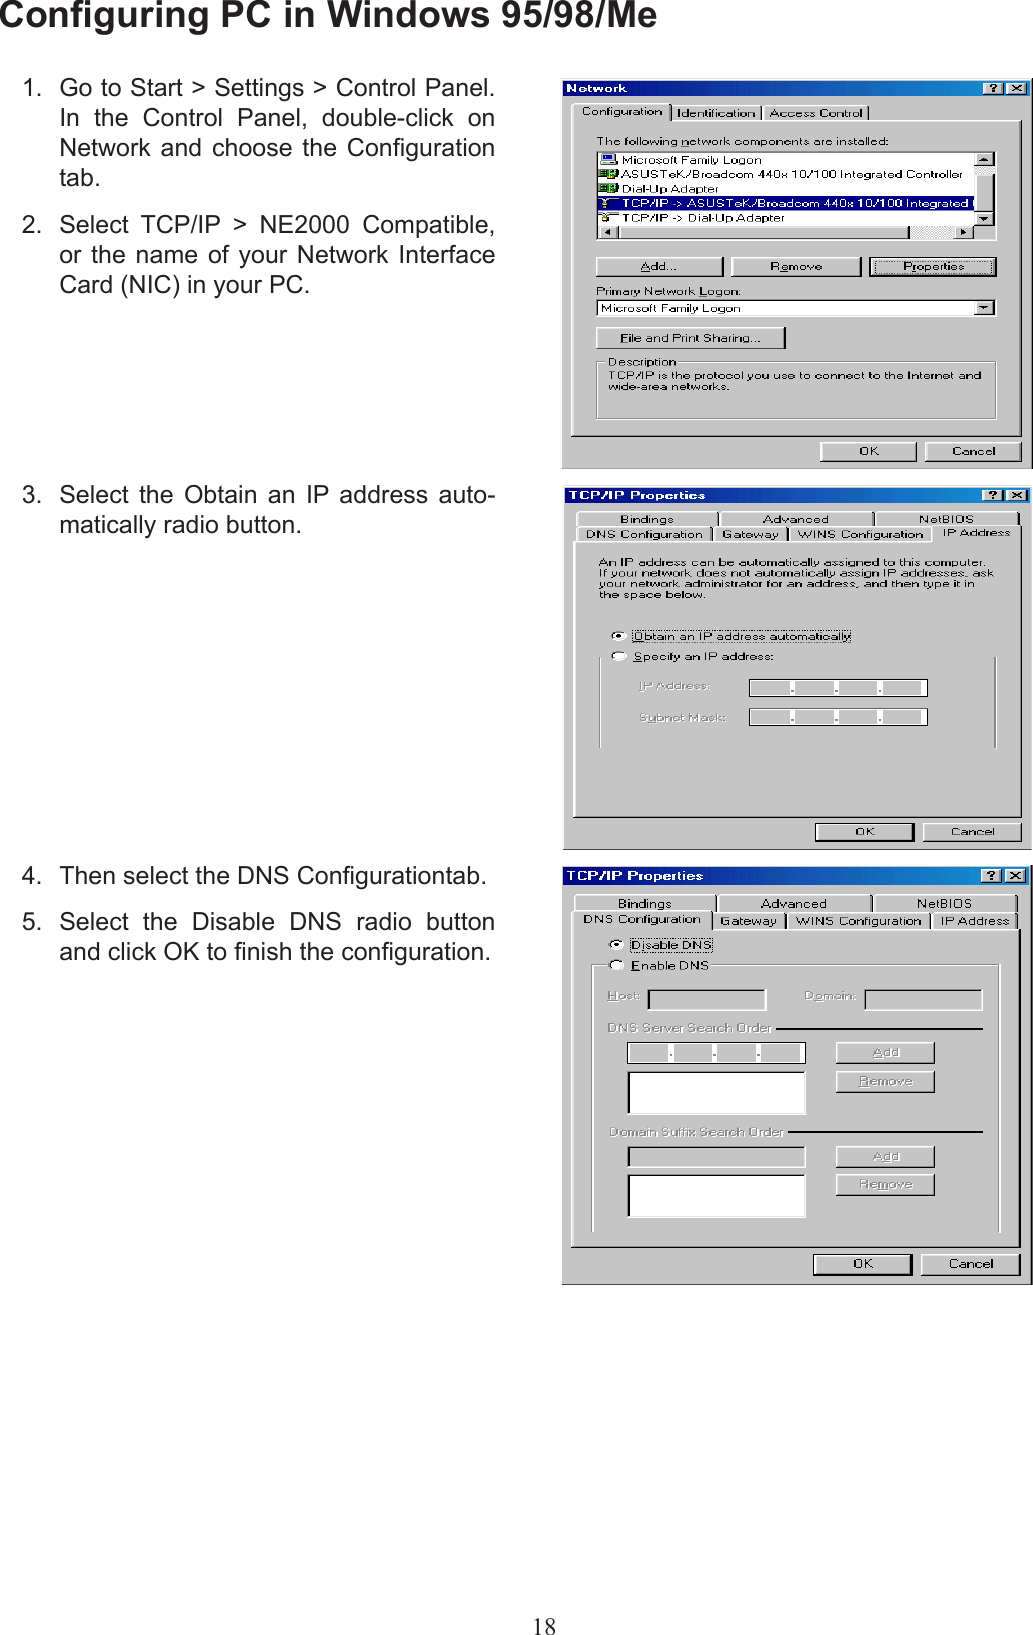 18Conguring PC in Windows 95/98/Me1.  Go to Start &gt; Settings &gt; Control Panel. In  the  Control  Panel,  double-click  on Network and choose  the  Conguration tab.2.  Select  TCP/IP  &gt;  NE2000  Compatible, or the name  of  your  Network  Interface Card (NIC) in your PC.3.  Select  the  Obtain  an  IP  address  auto-matically radio button.4.  Then select the DNS Congurationtab.5.  Select  the  Disable  DNS  radio  button and click OK to nish the conguration.